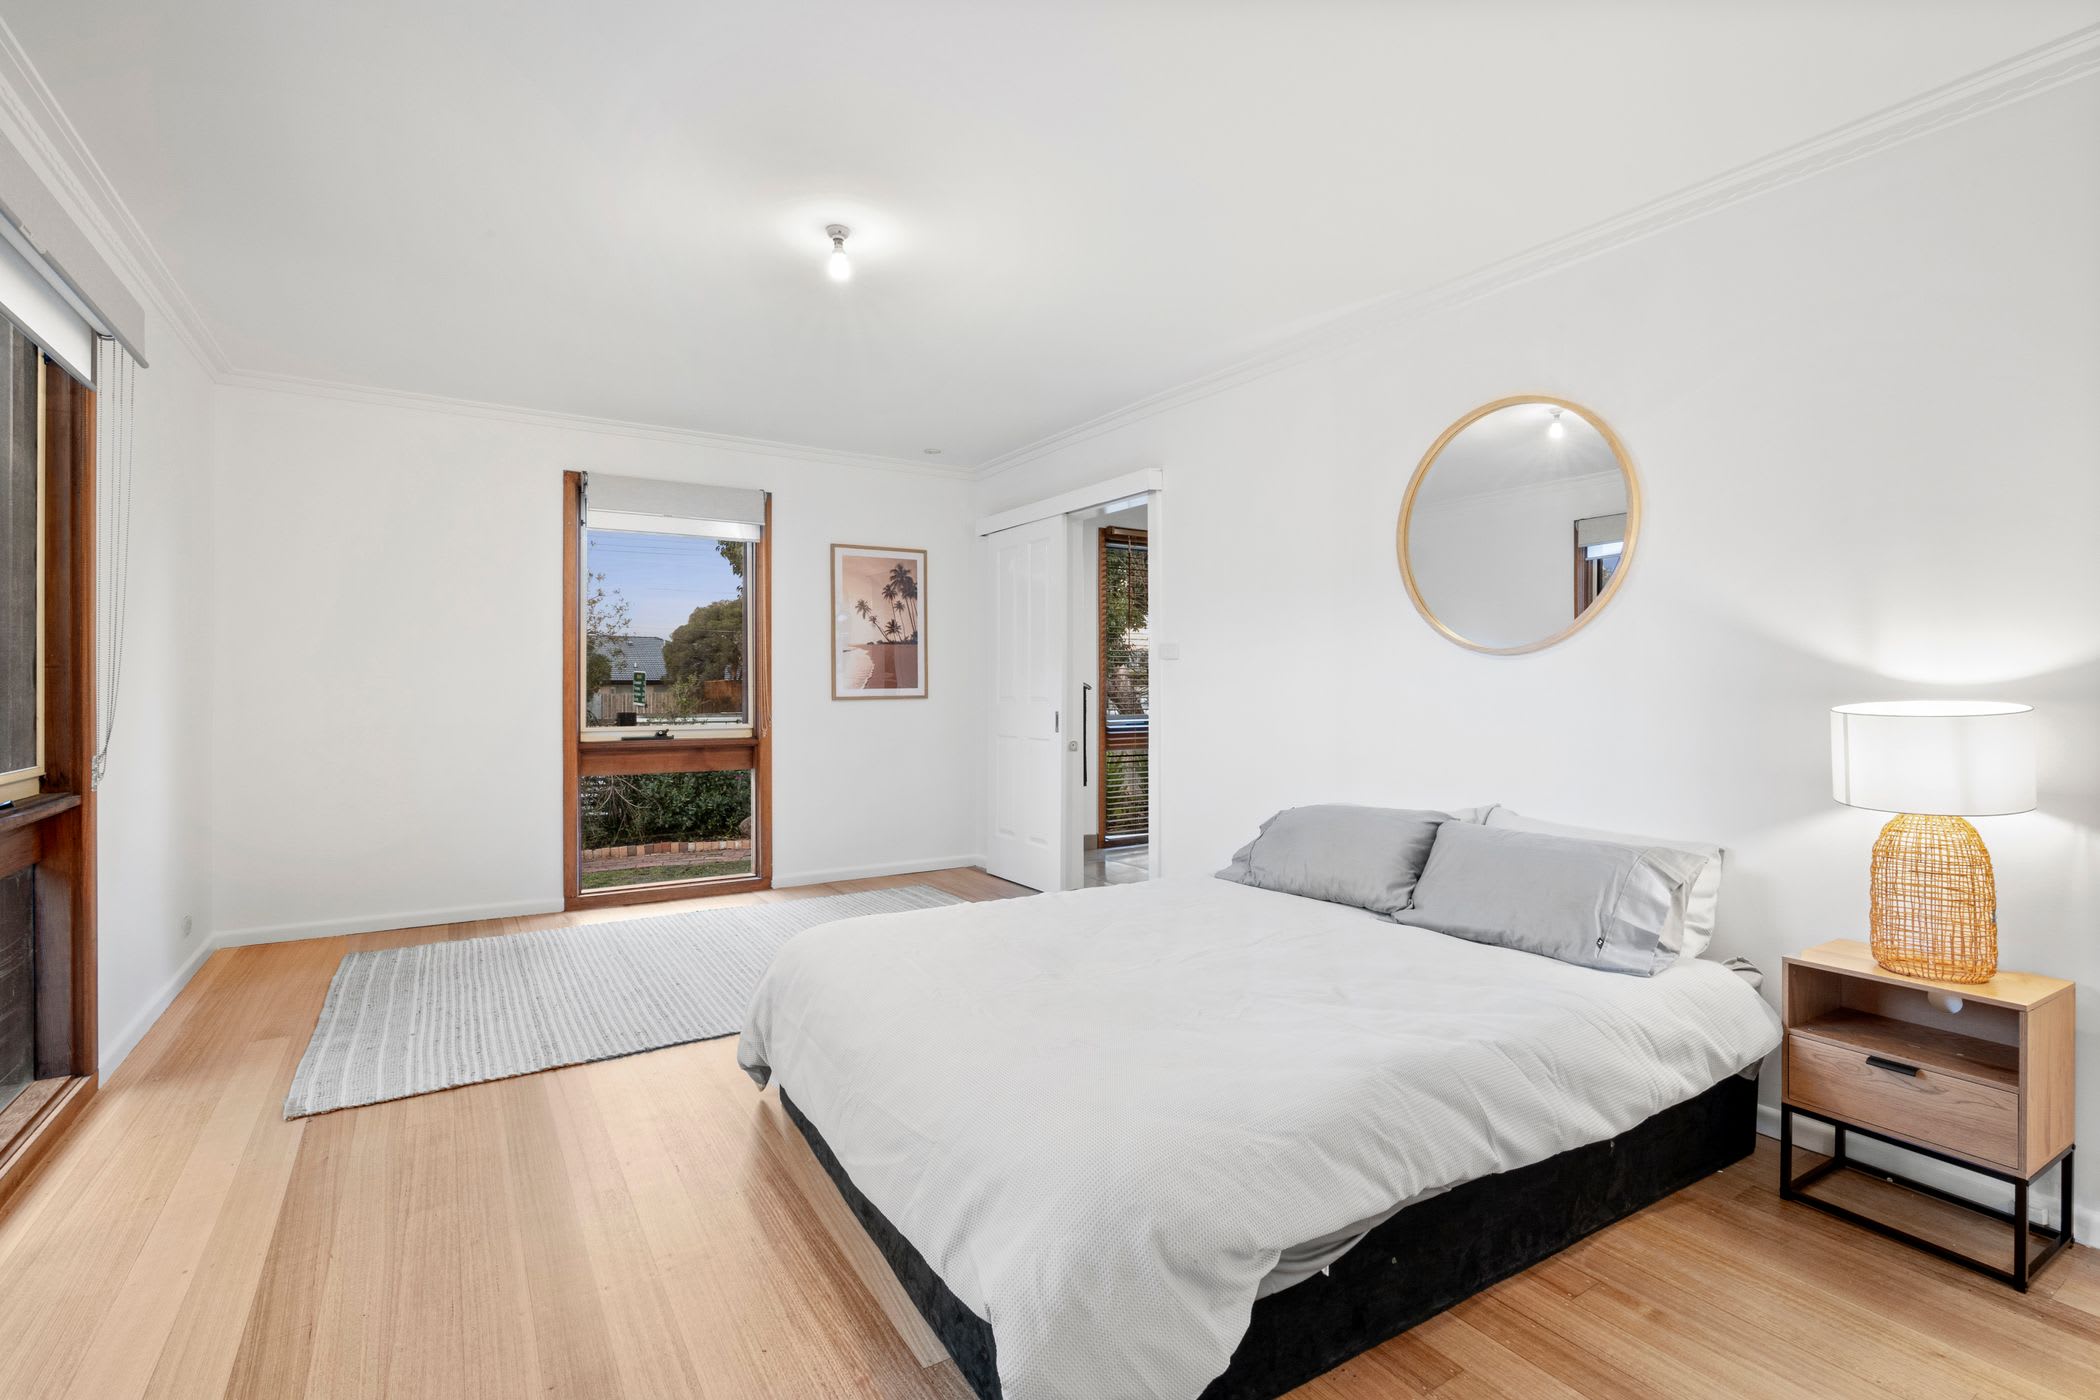 Property Image 2 - Belmont’s Modern Delight Family Home